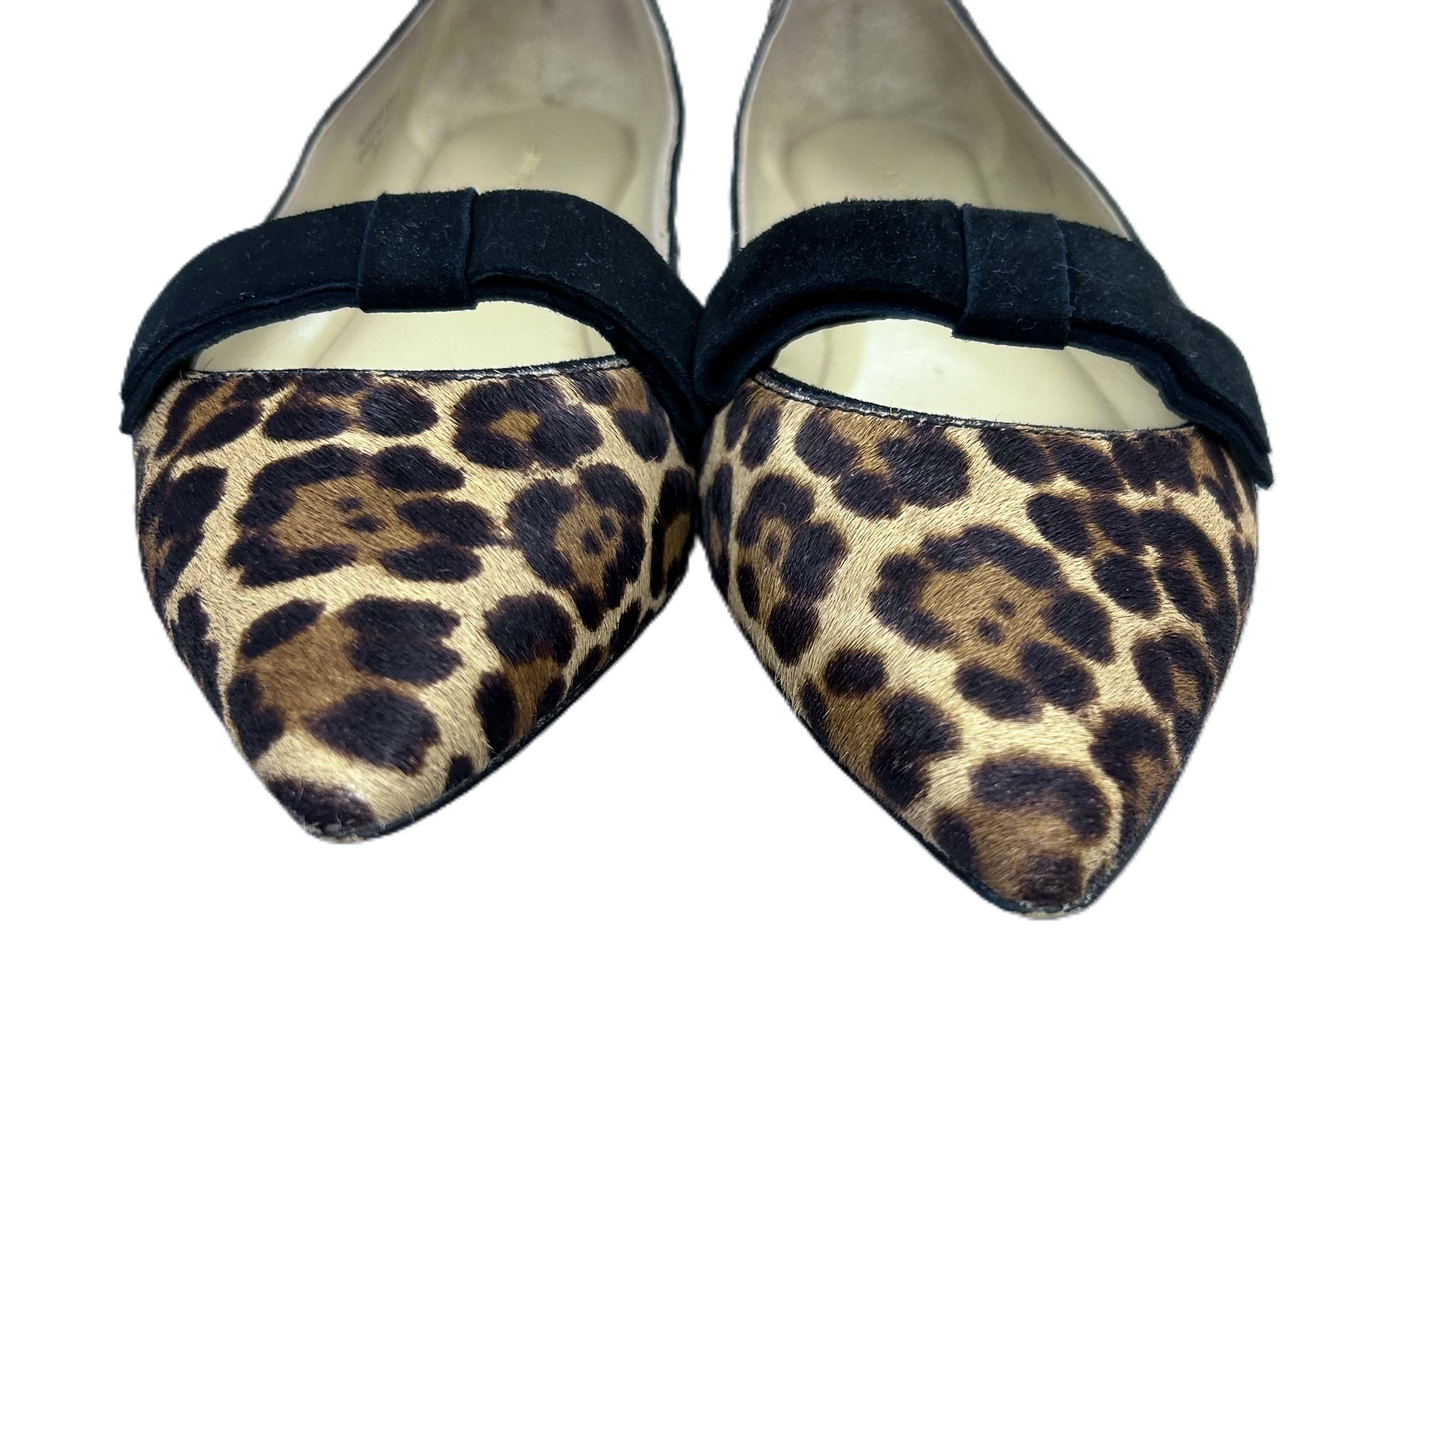 Shoes Flats By Ann Taylor  Size: 8